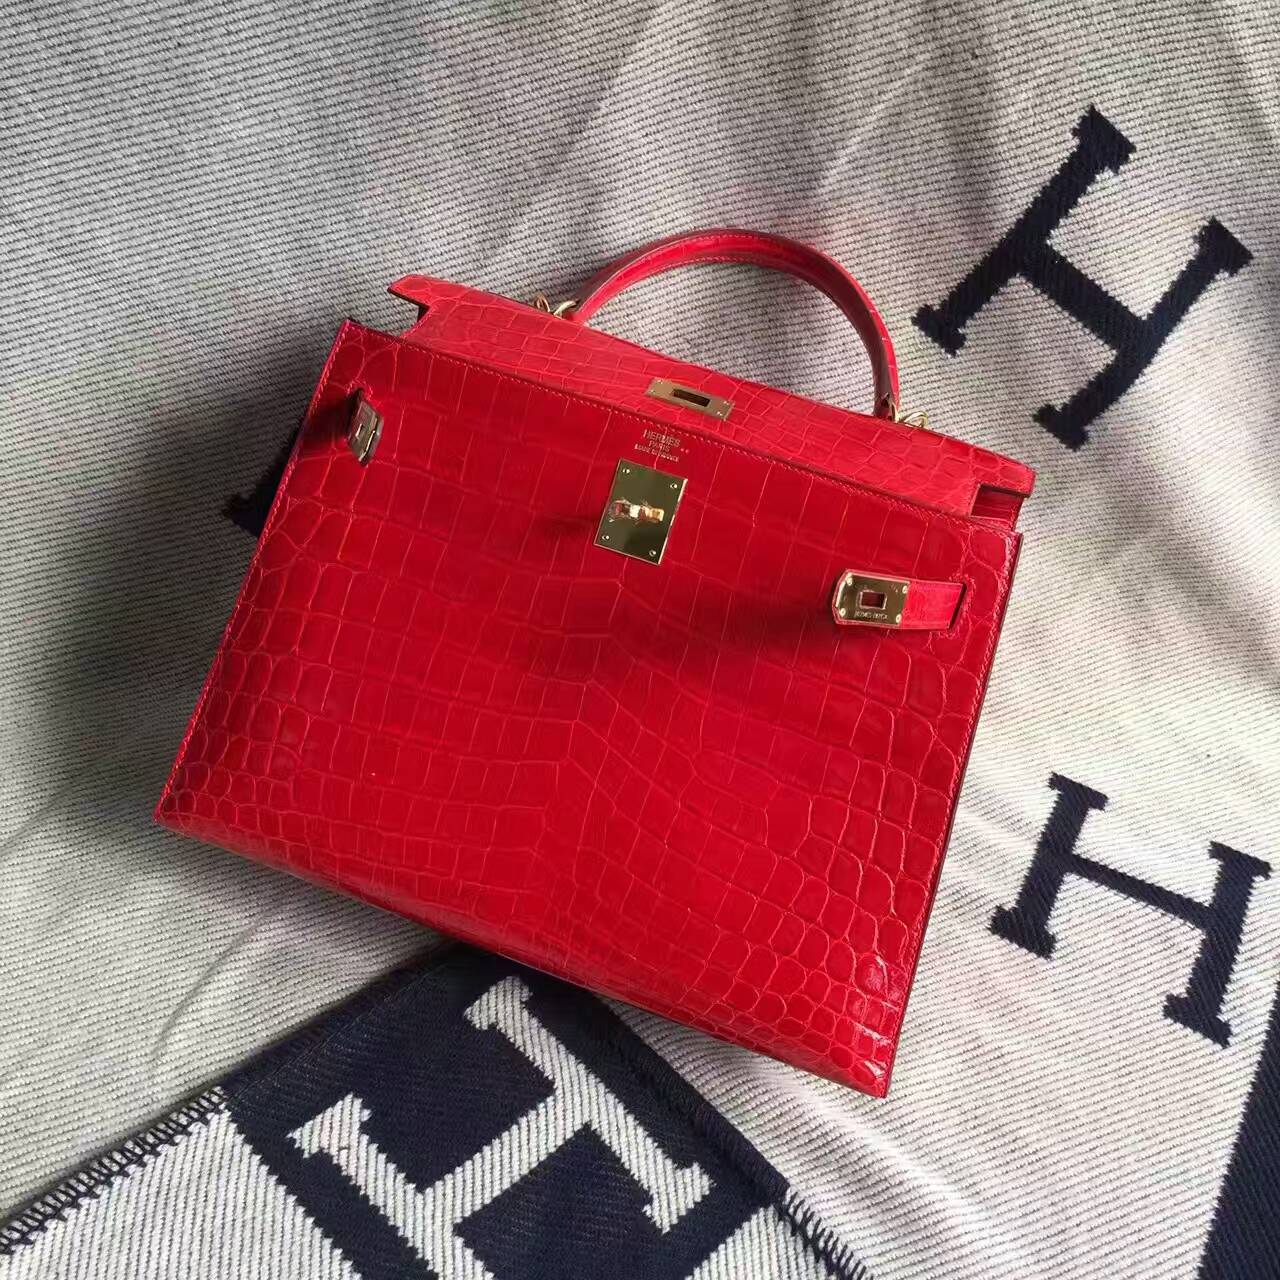 Hand Stitching Hermes Crocodile Shiny Leather Kelly Bag 32CM in CK95 Braise